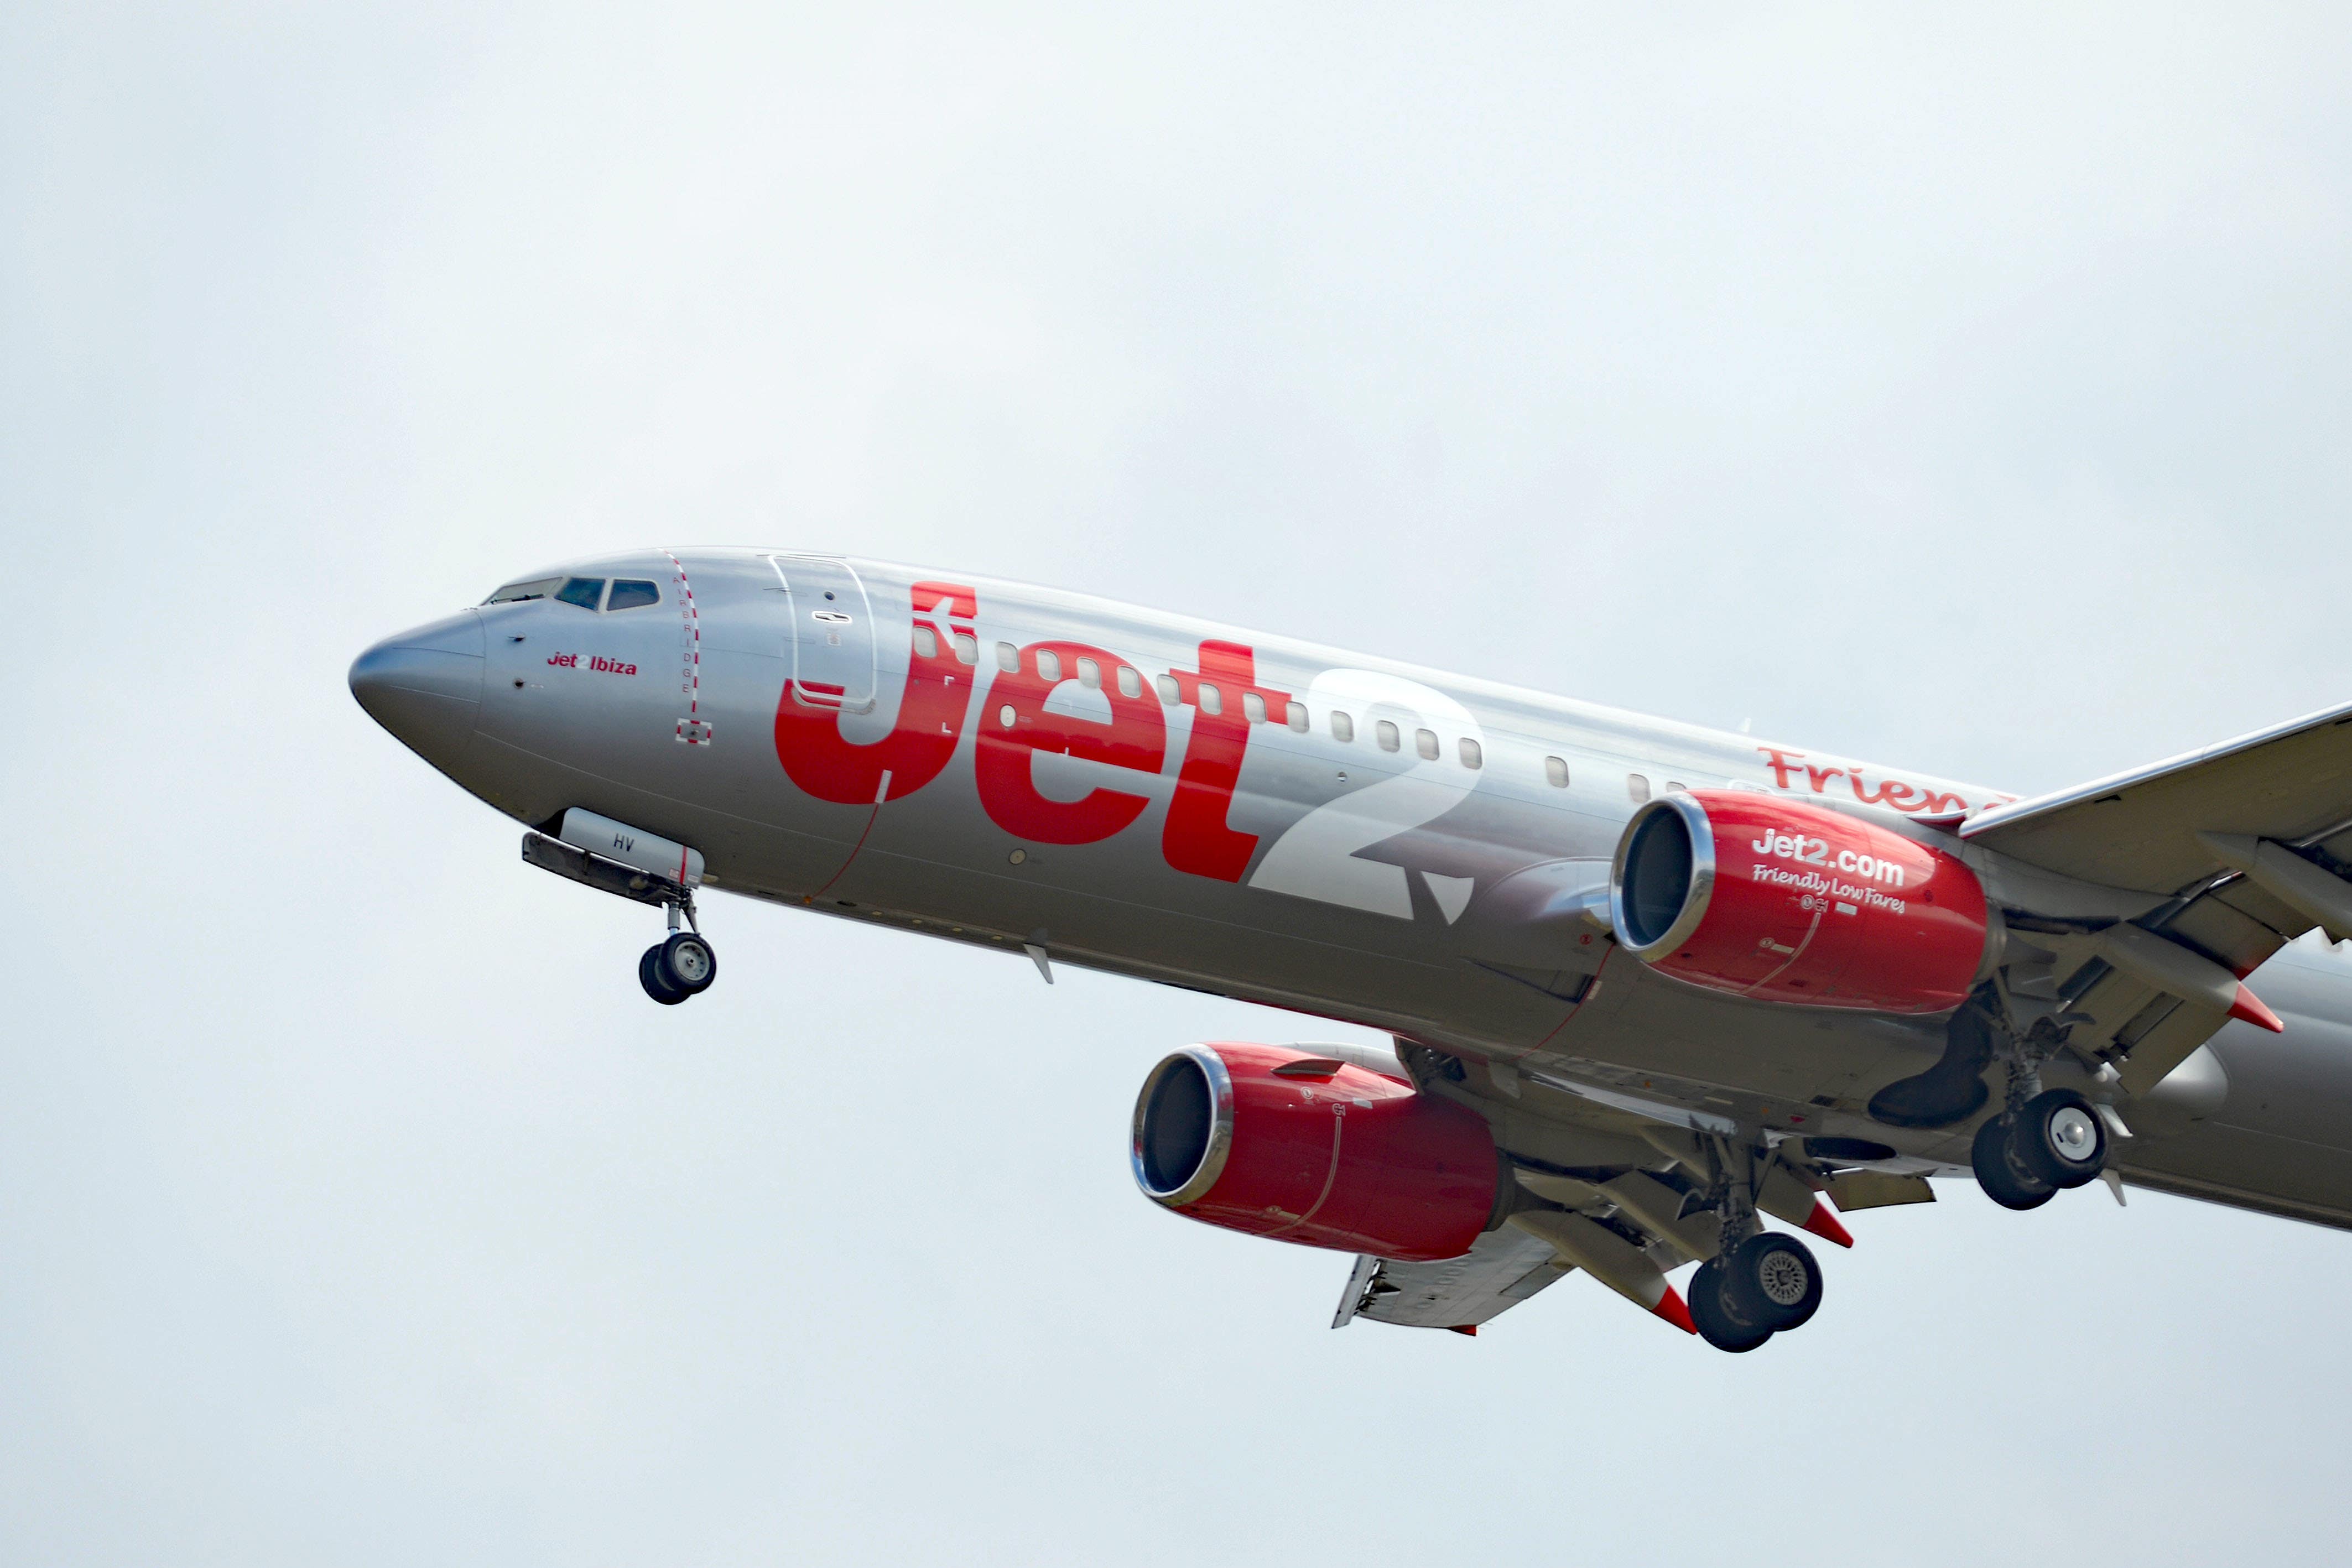 The incident occurred after a Jet2 flight